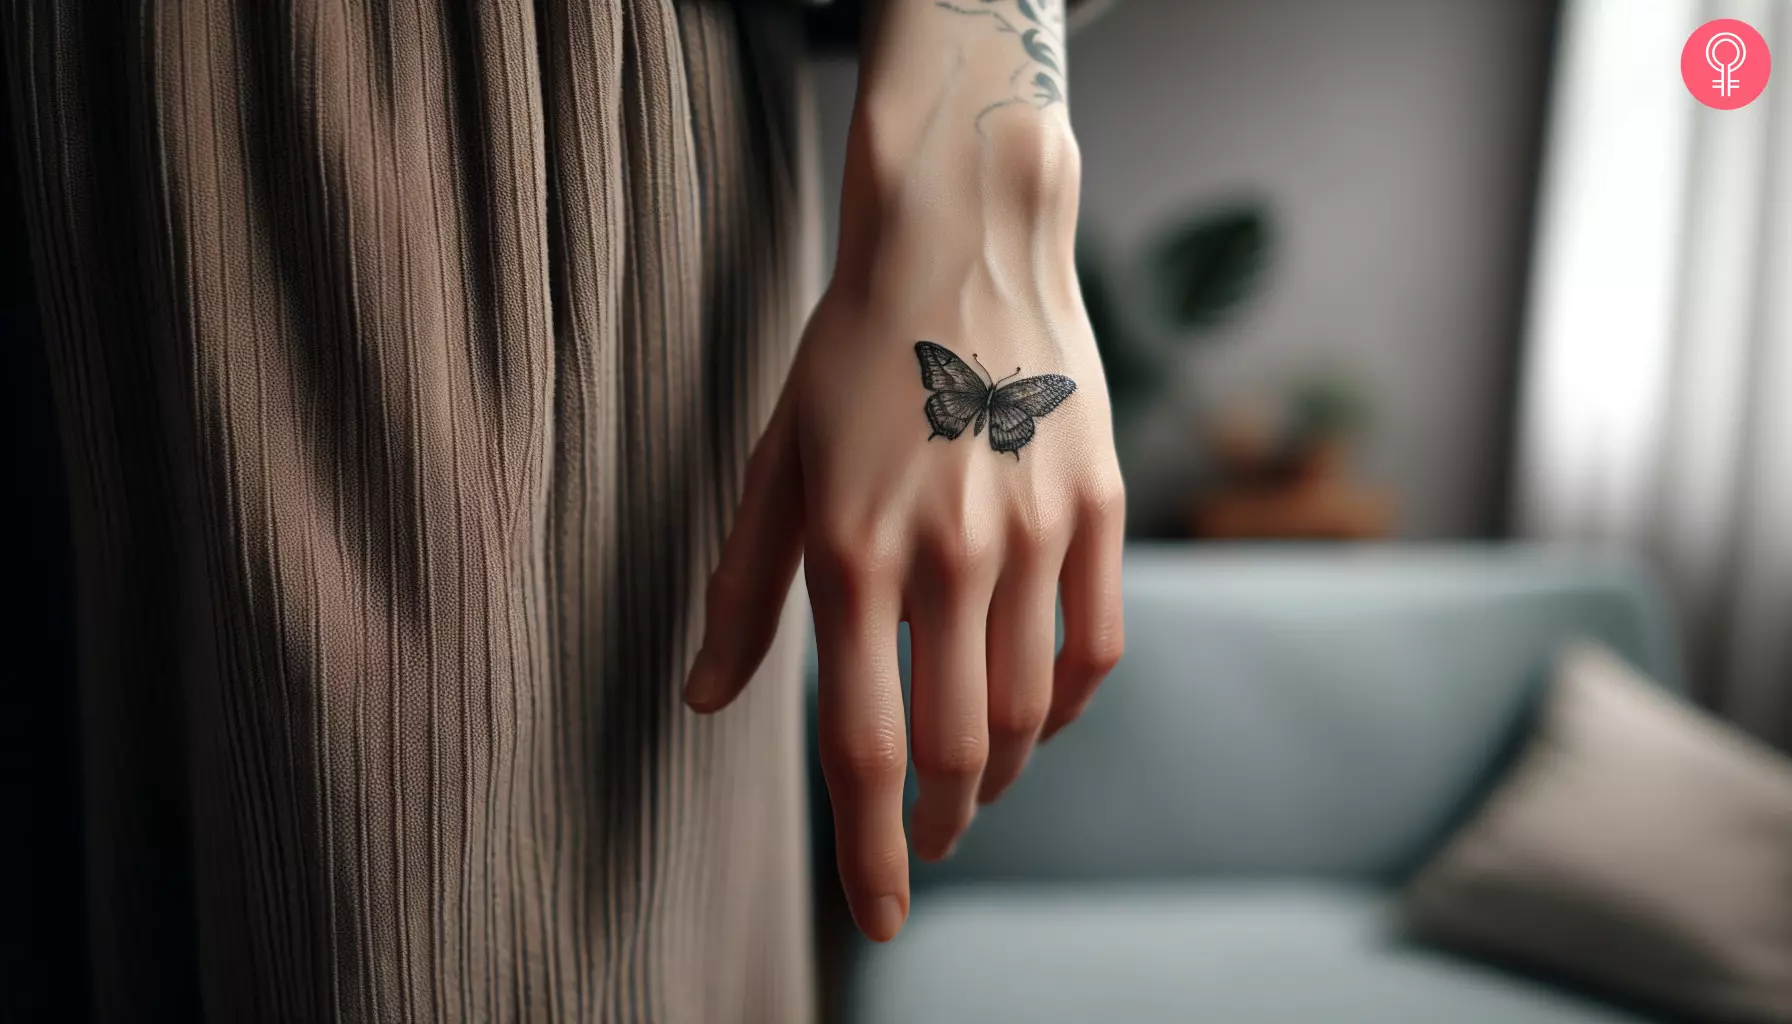 A micro realism hand tattoo of a butterfly